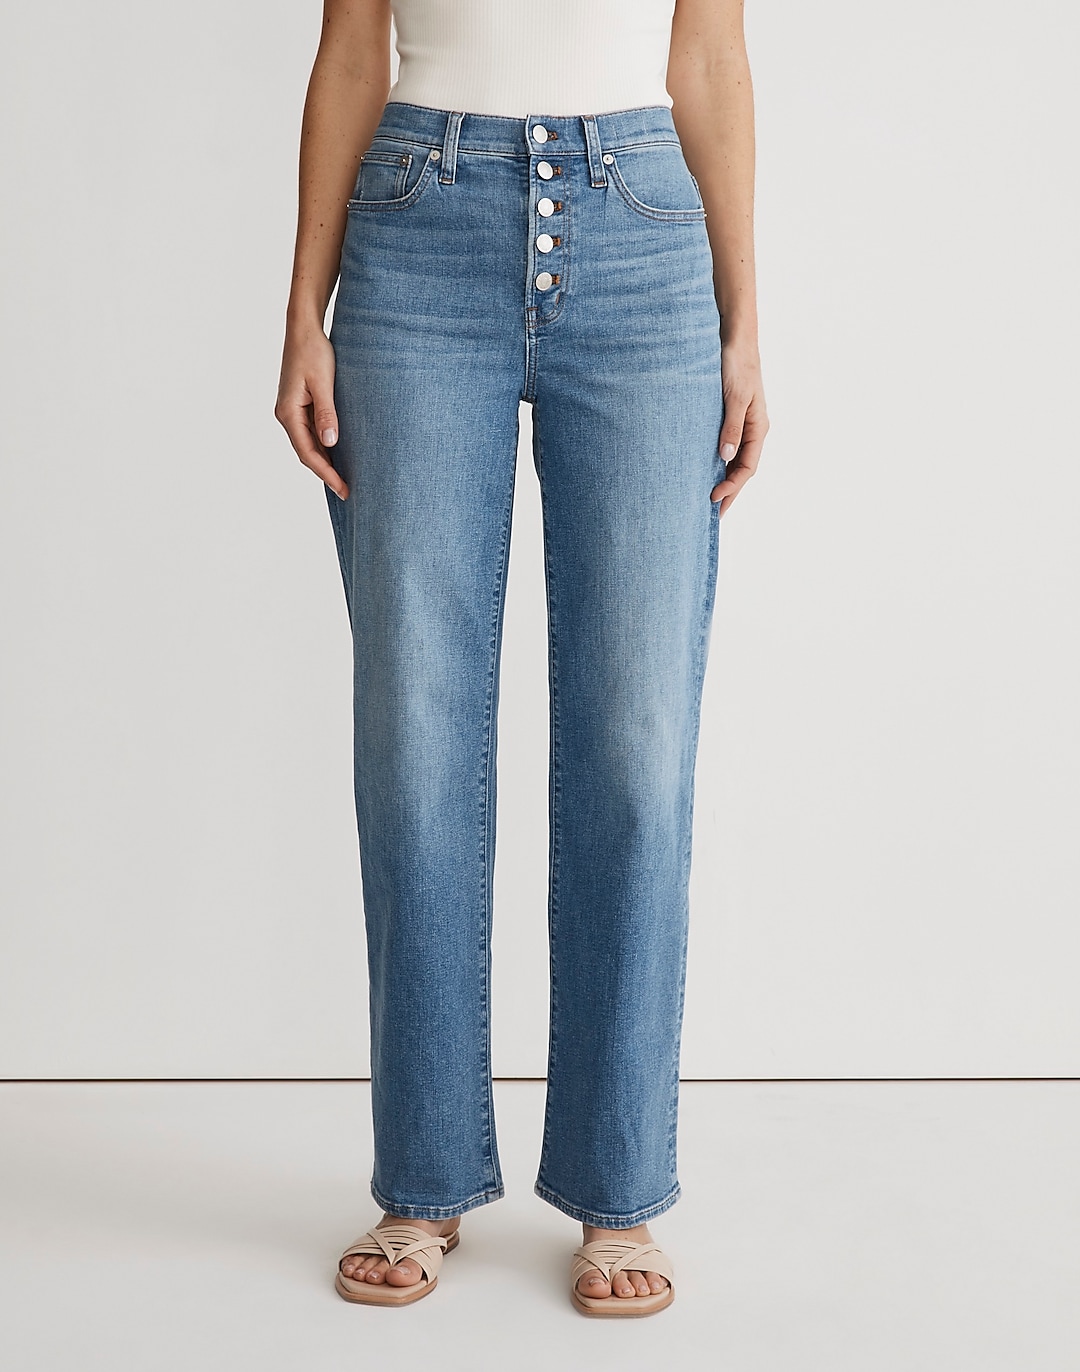 The Perfect Vintage Wide-Leg Jean in Ohlman Wash | Madewell